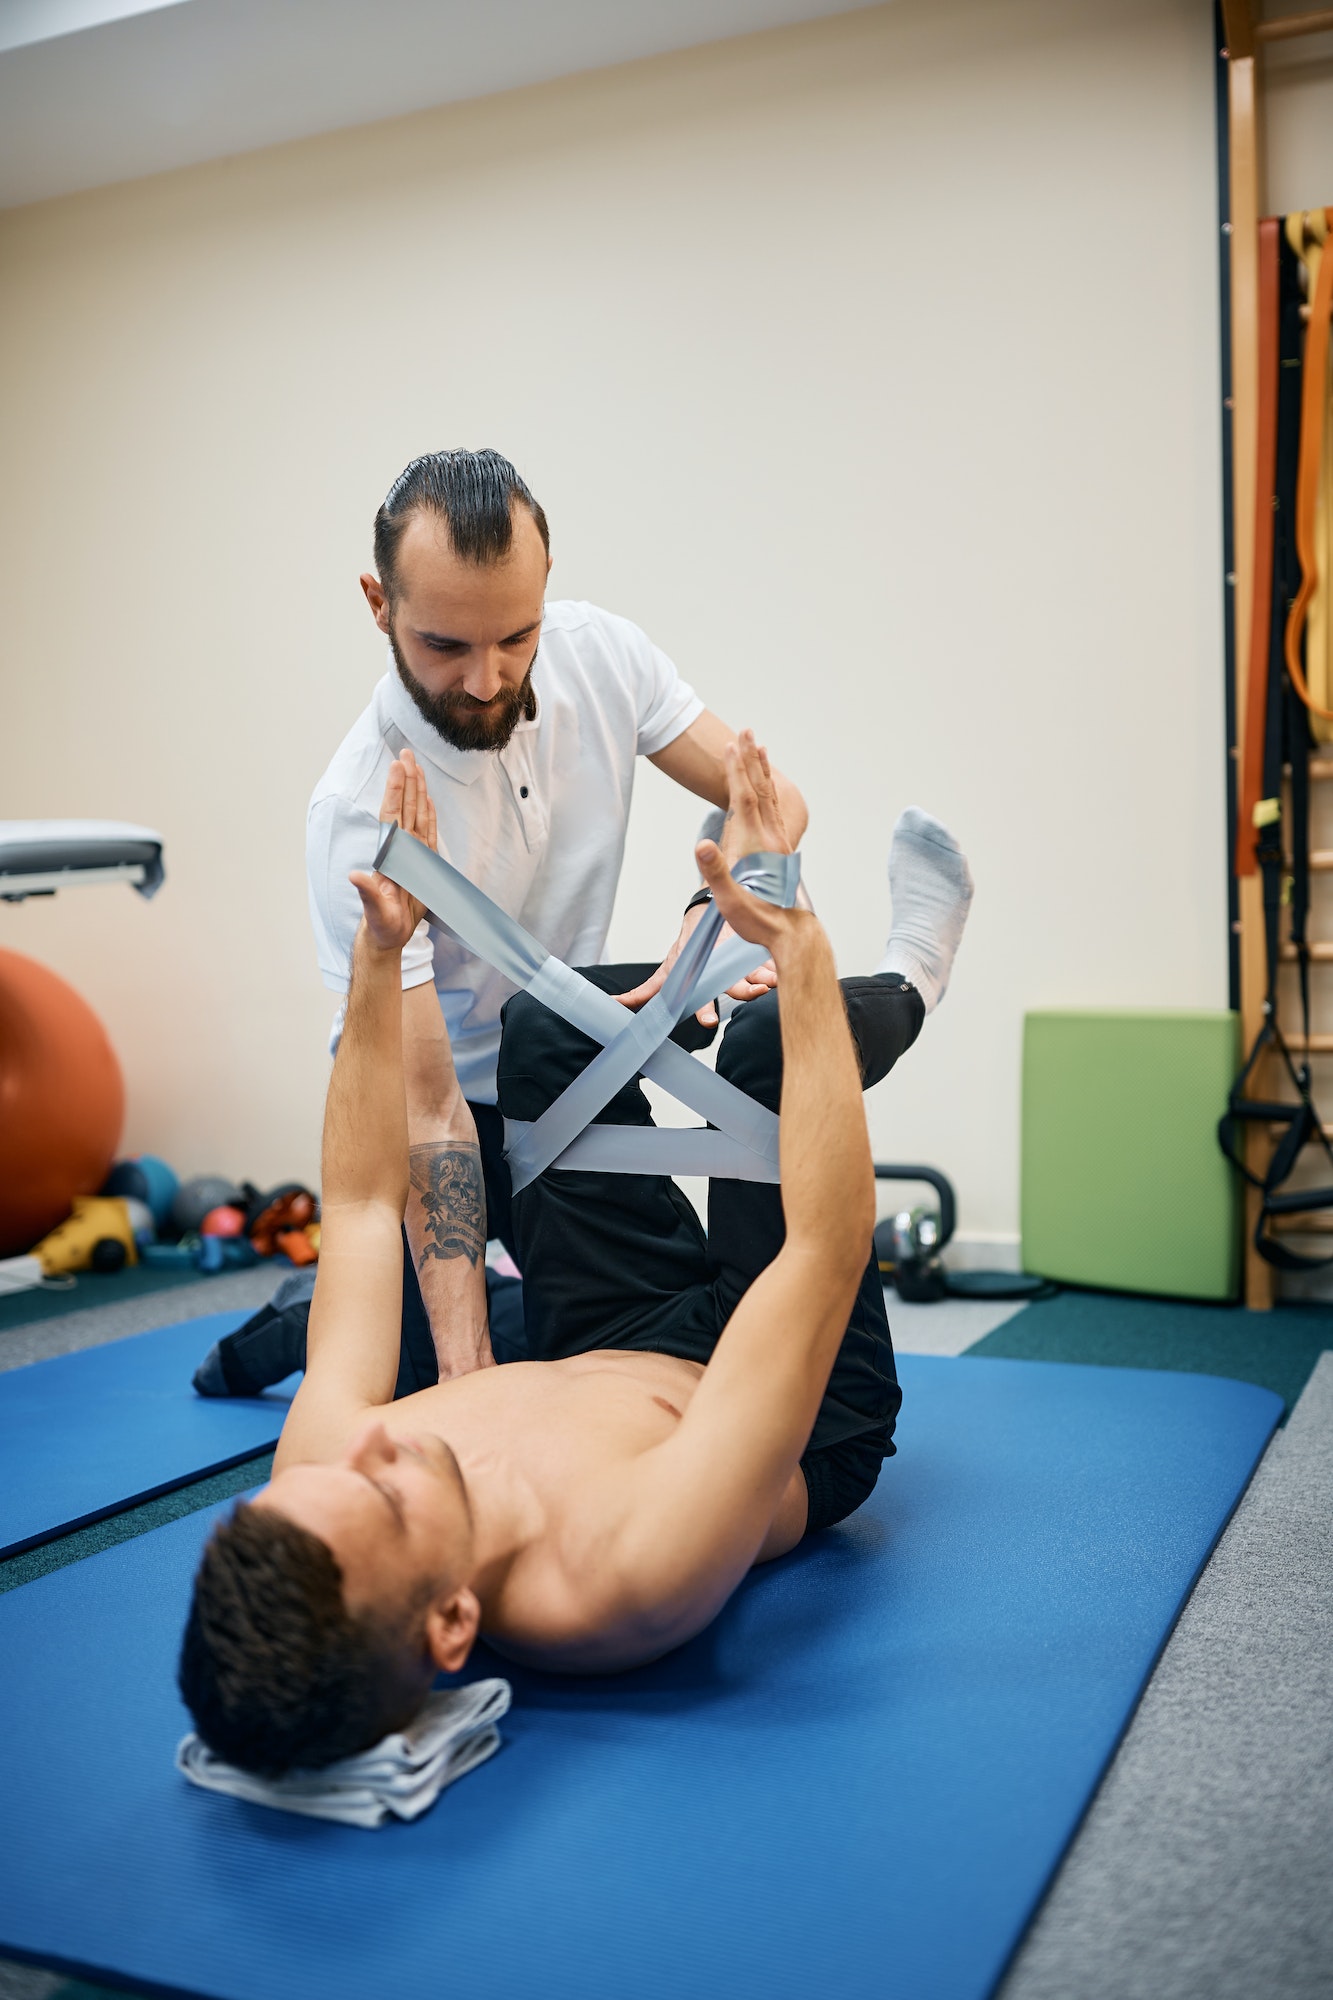 Physical therapist working with male patient at rehabilitation center.